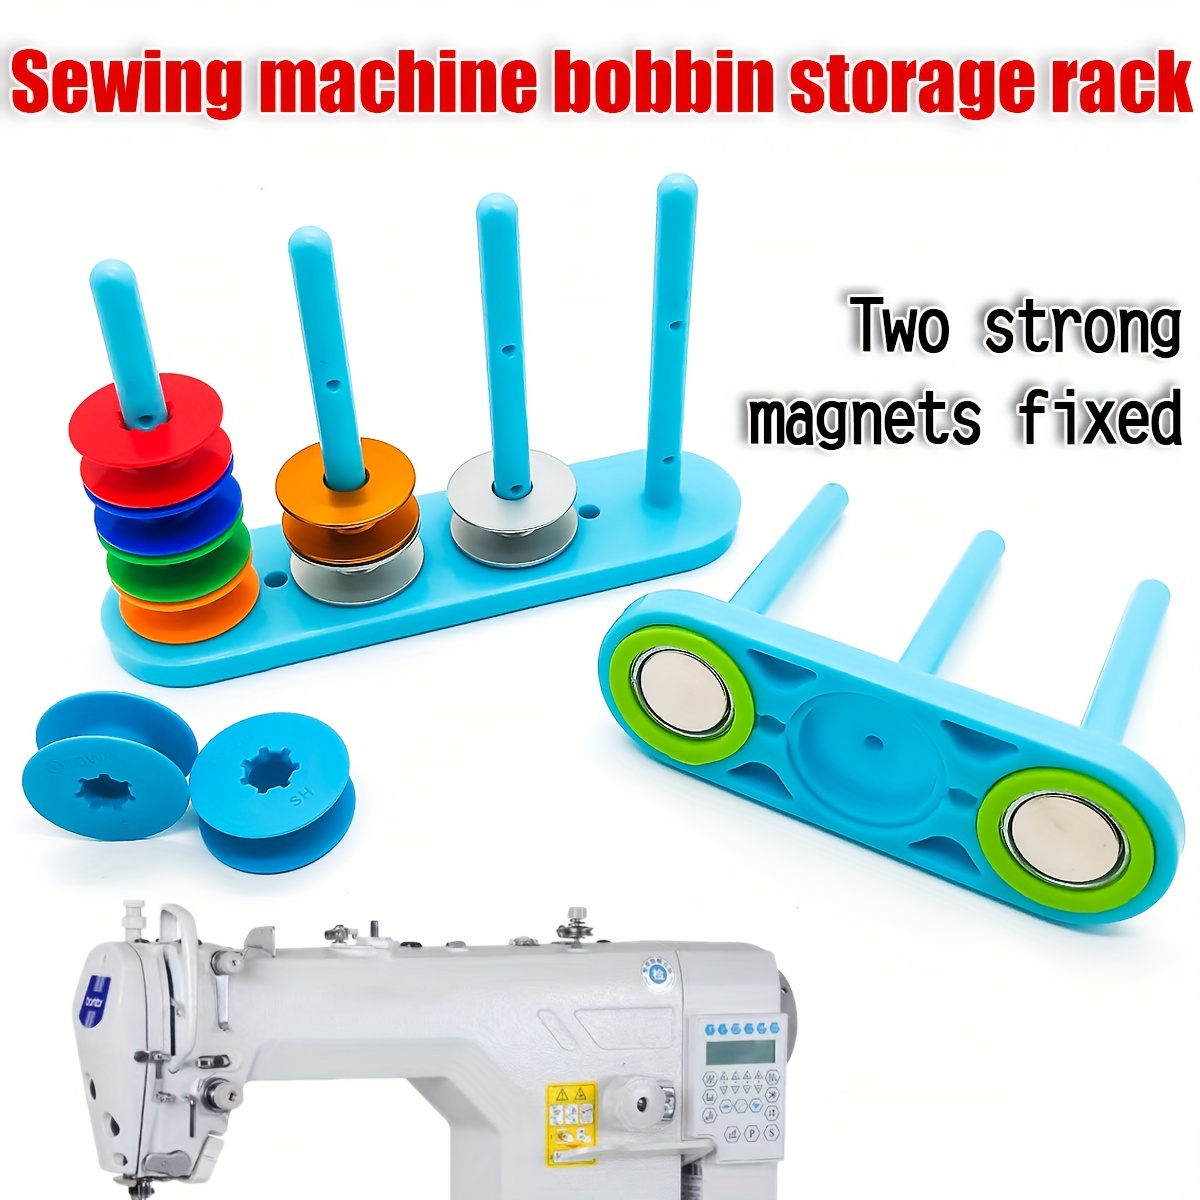 

Magnetic Bobbin Holder For Sewing Machines - Easy Install, No Power Needed, Blue - Ideal For Clothing Factories & Home Use